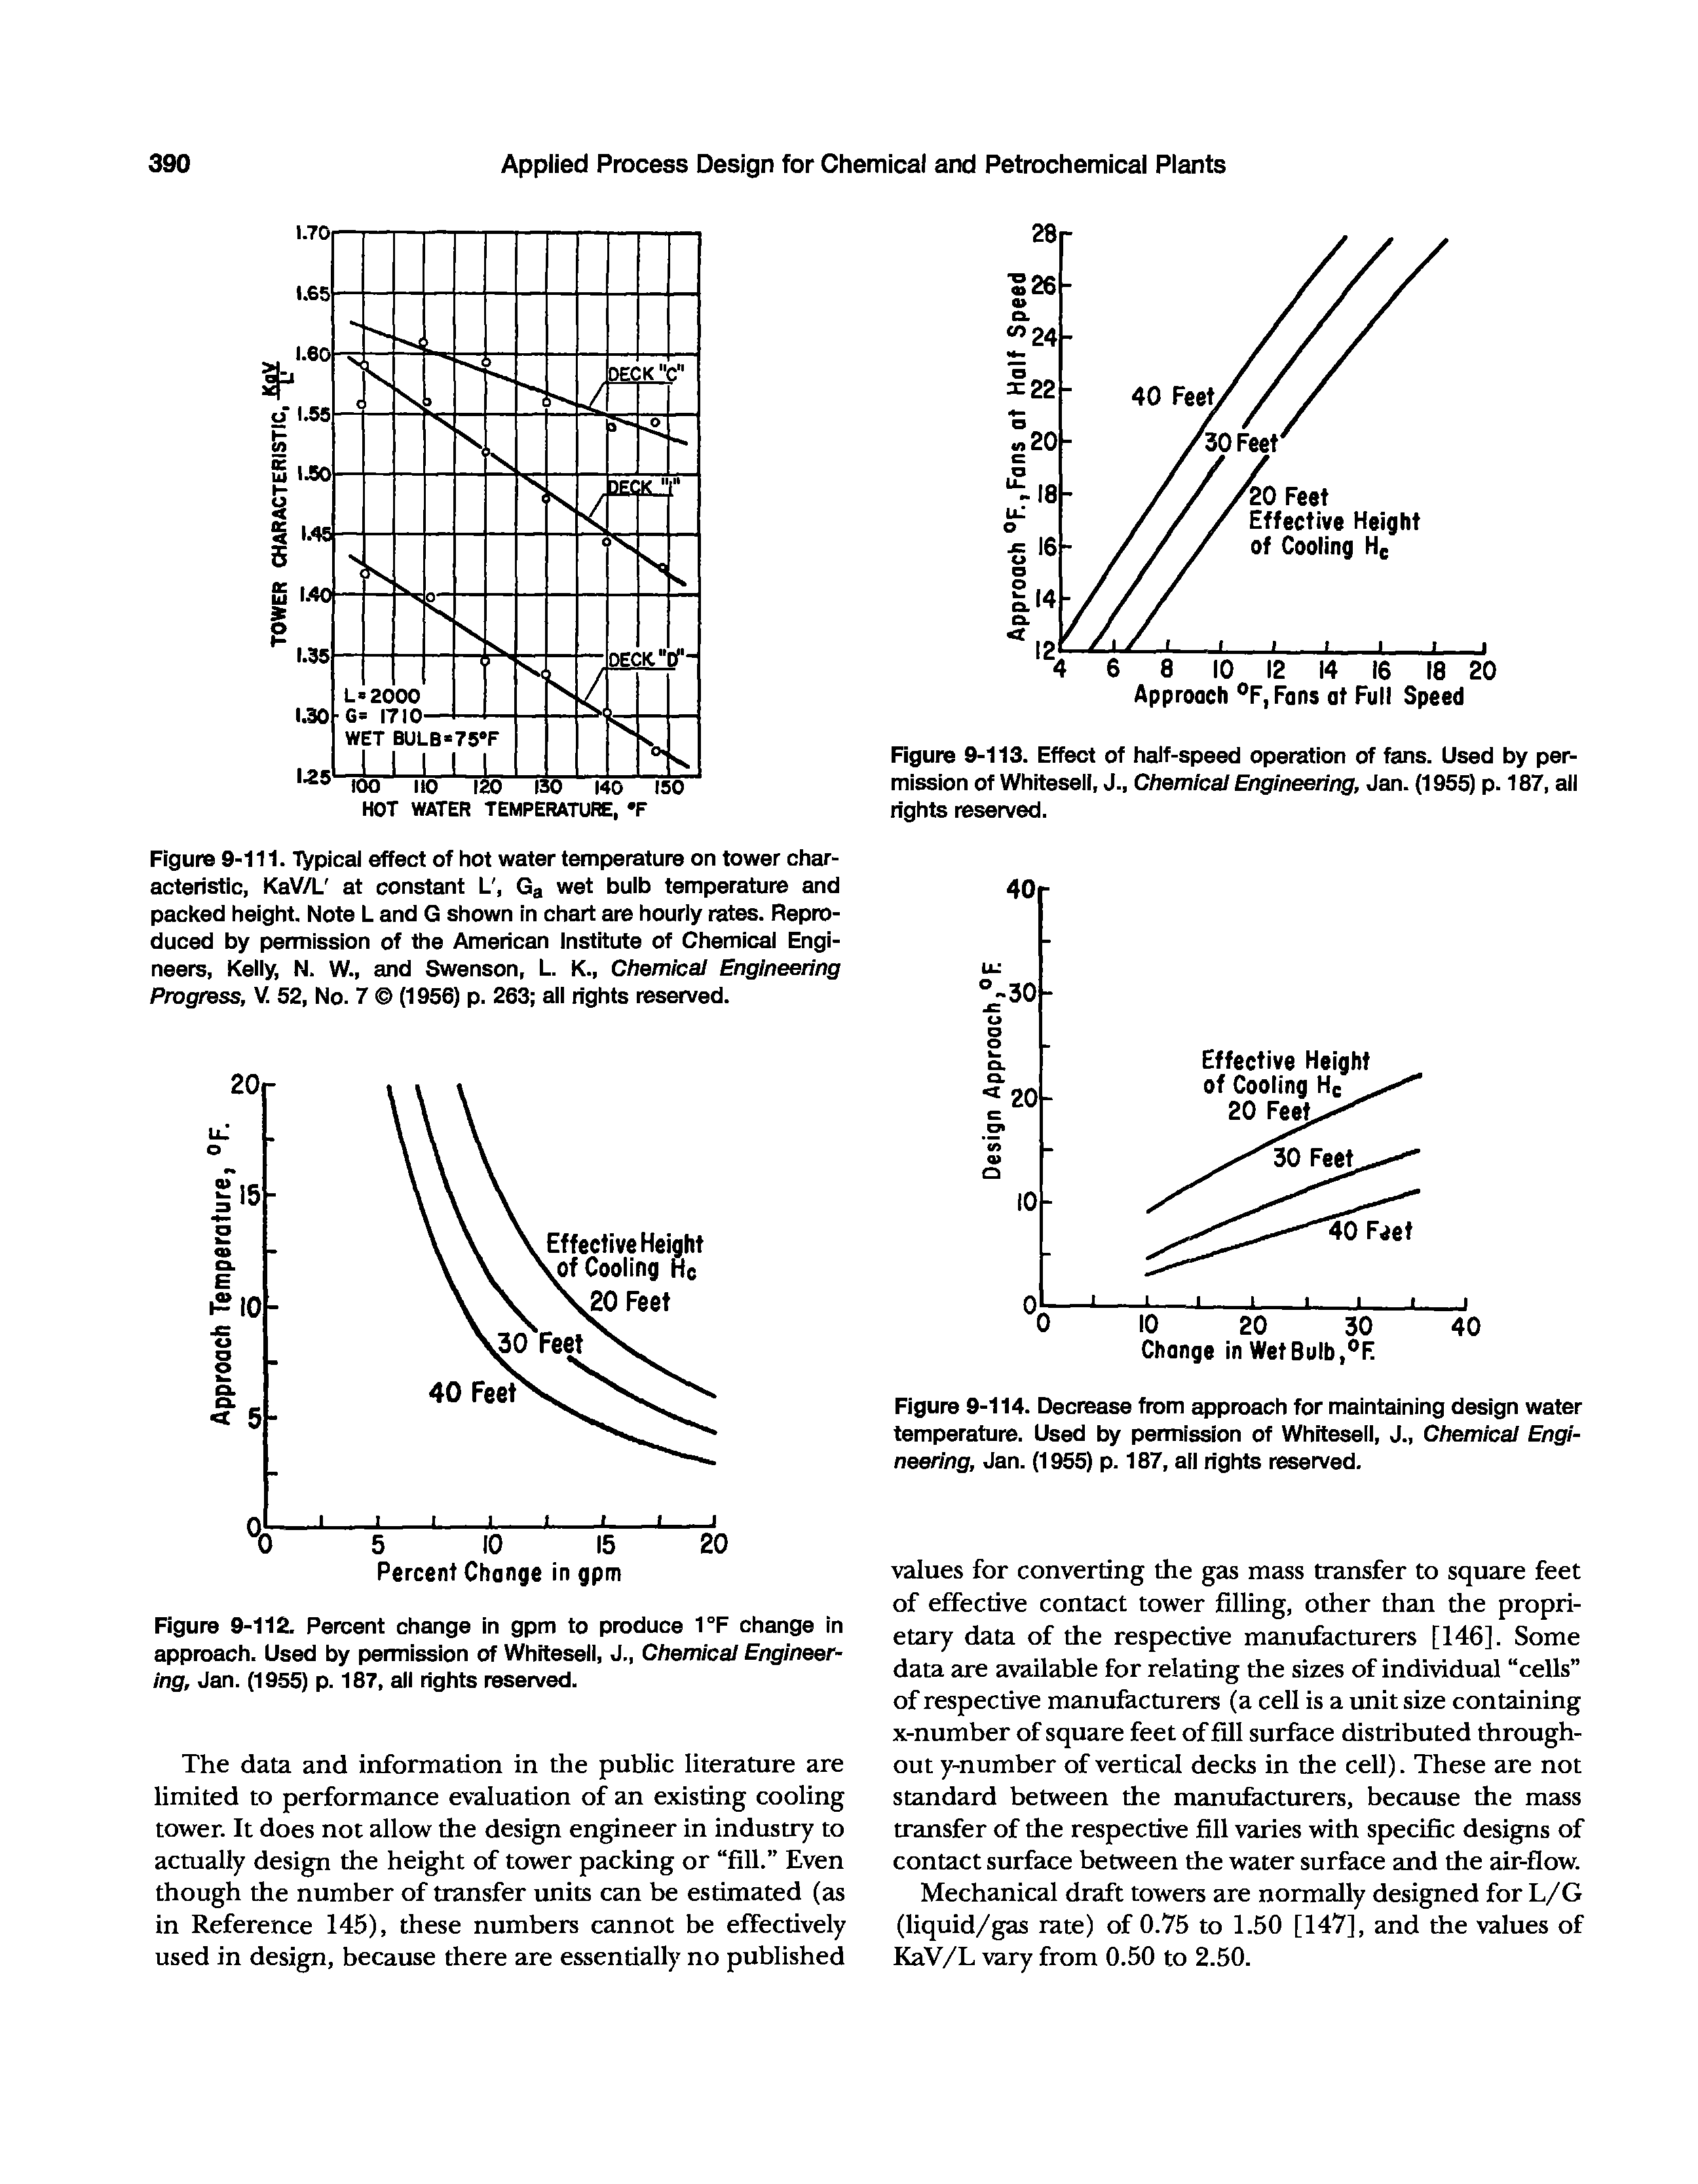 Figure 9-112. Percent change in gpm to produce 1°F change in approach. Used by permission of Whitesell, J., Chemical Engineering, Jan. (1955) p. 187, all rights reserved.